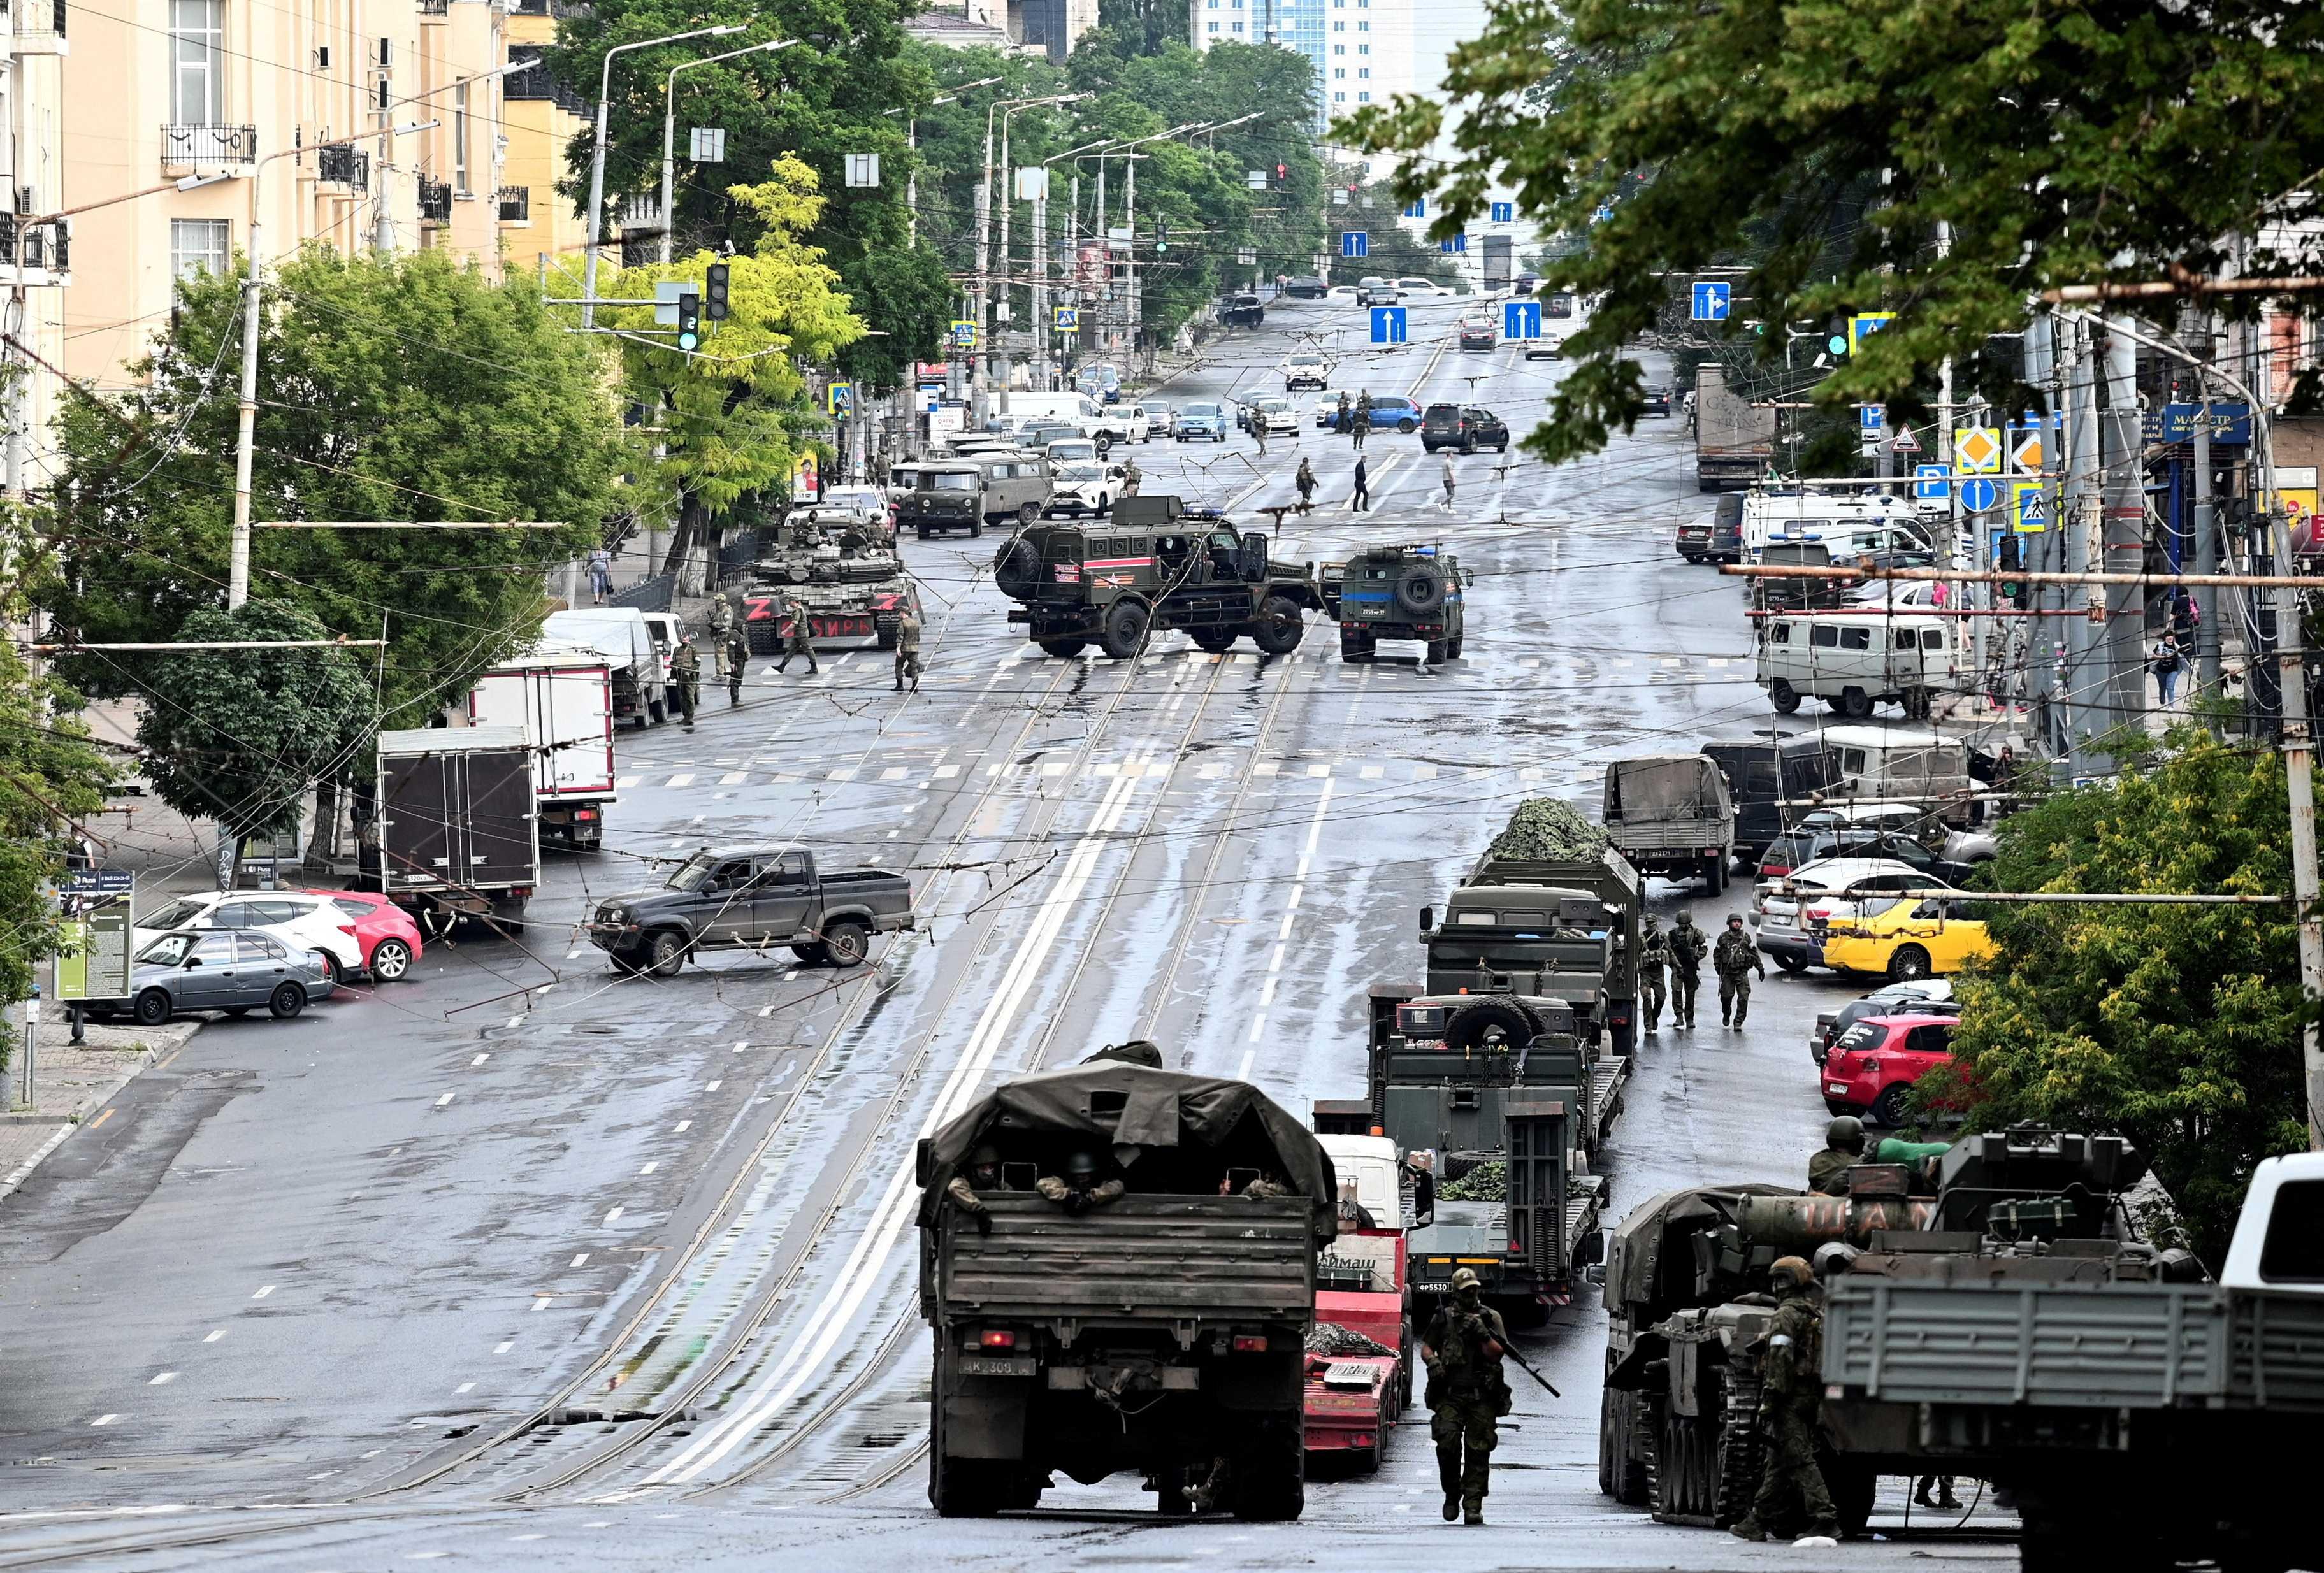 Fighters of Wagner private mercenary group are deployed in a street near the headquarters of the Southern Military District in the city of Rostov-on-Don, Russia, June 24. Photo: Reuters